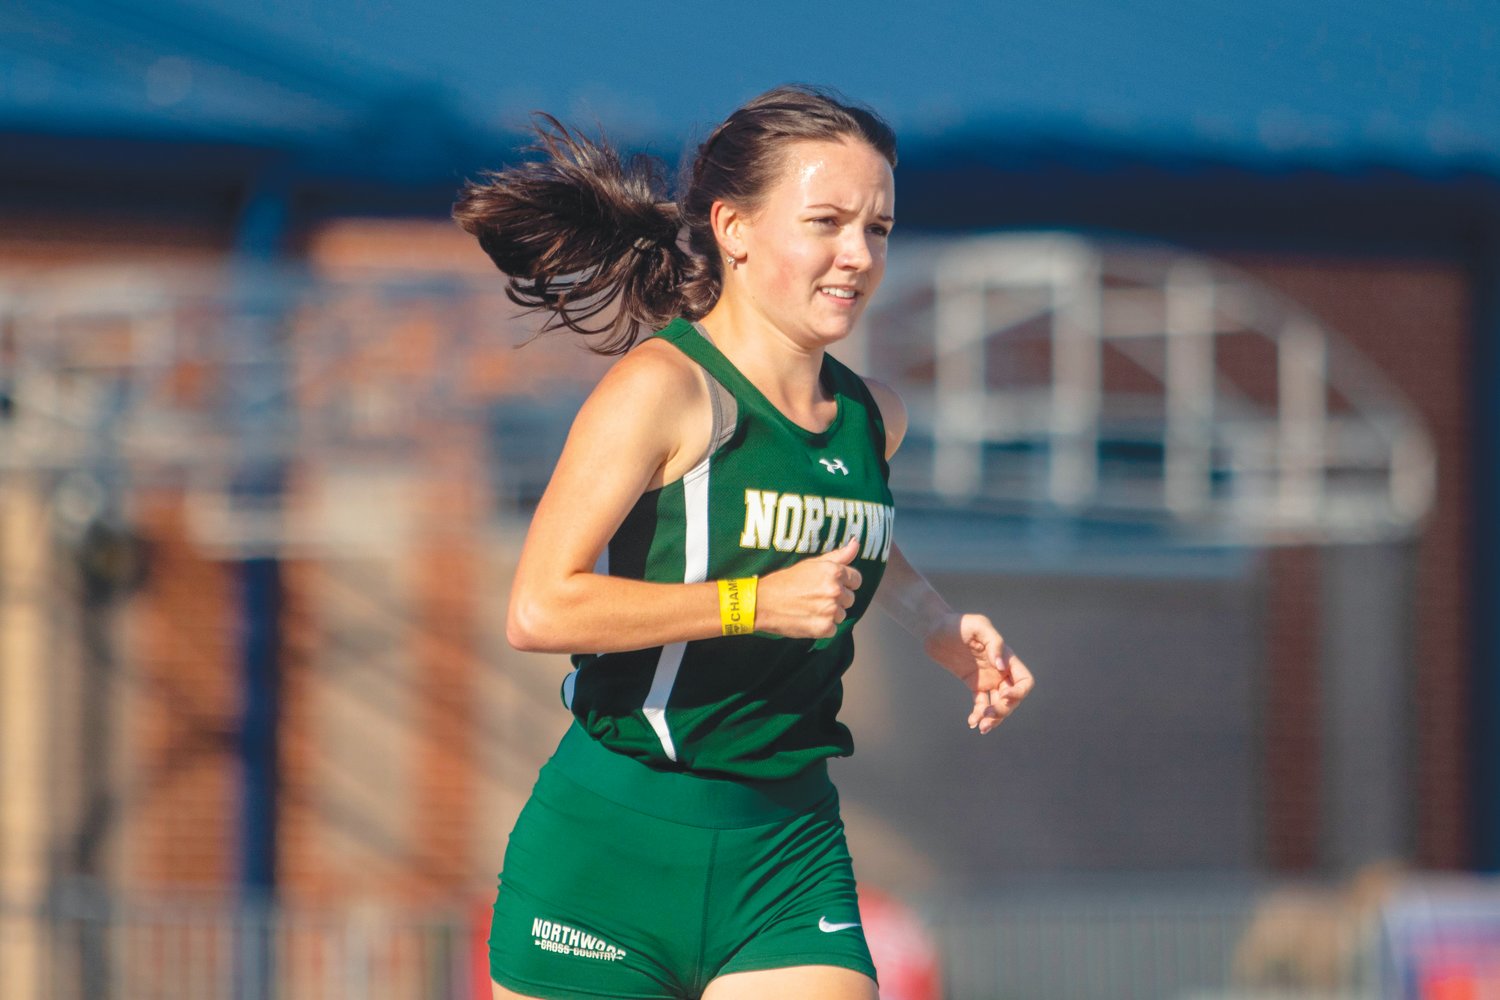 Northwood senior distance runner Caroline Murrell strides down the track in one of her two state-title-winning races at the 2022 NCHSAA 3A Track & Field State Championships last Friday in Greensboro. Murrell took first place in both the women's 1,600- and 3,200-meter runs, amounting to four state titles in the last 12 months.